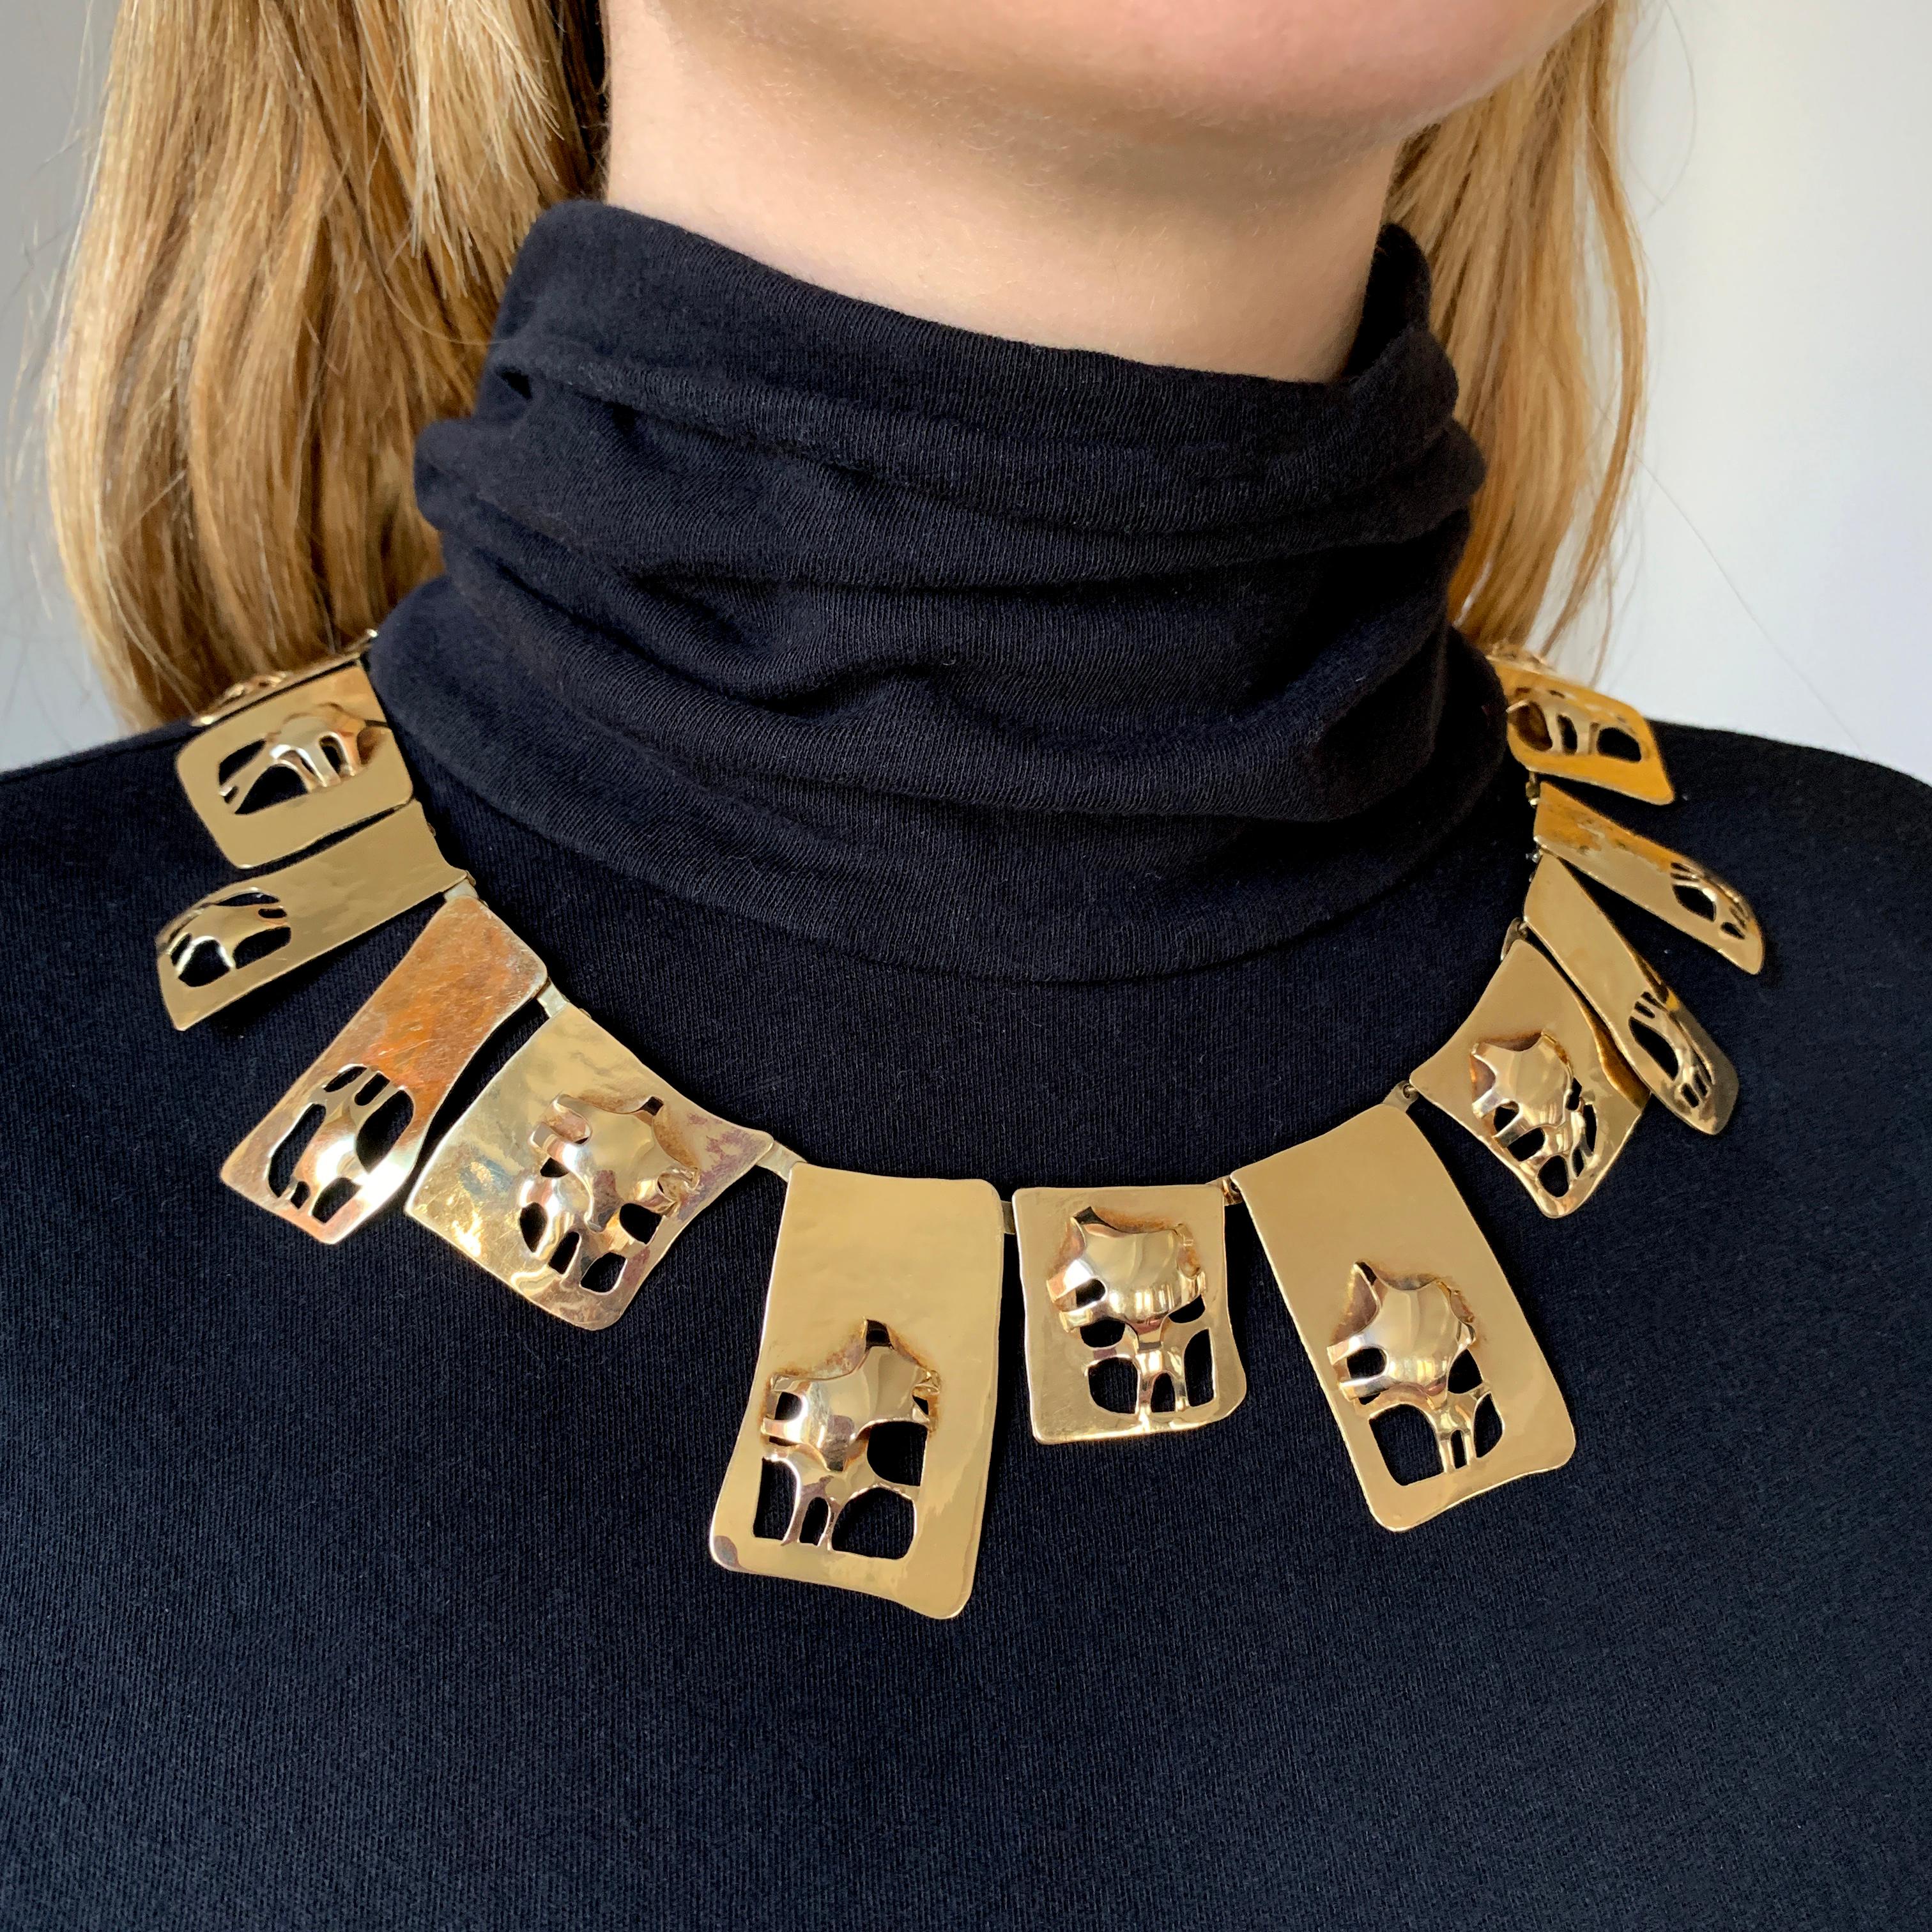 A one-of-a-kind 14 karat gold handmade necklace, with cut out details, by C.Y. Noomen, c. 1980.

Signed C.Y. Noomen, Schoonhoven, The Netherlands. Also marked with the hallmark of the Vakschool Schoonhoven (the national academy for gold and